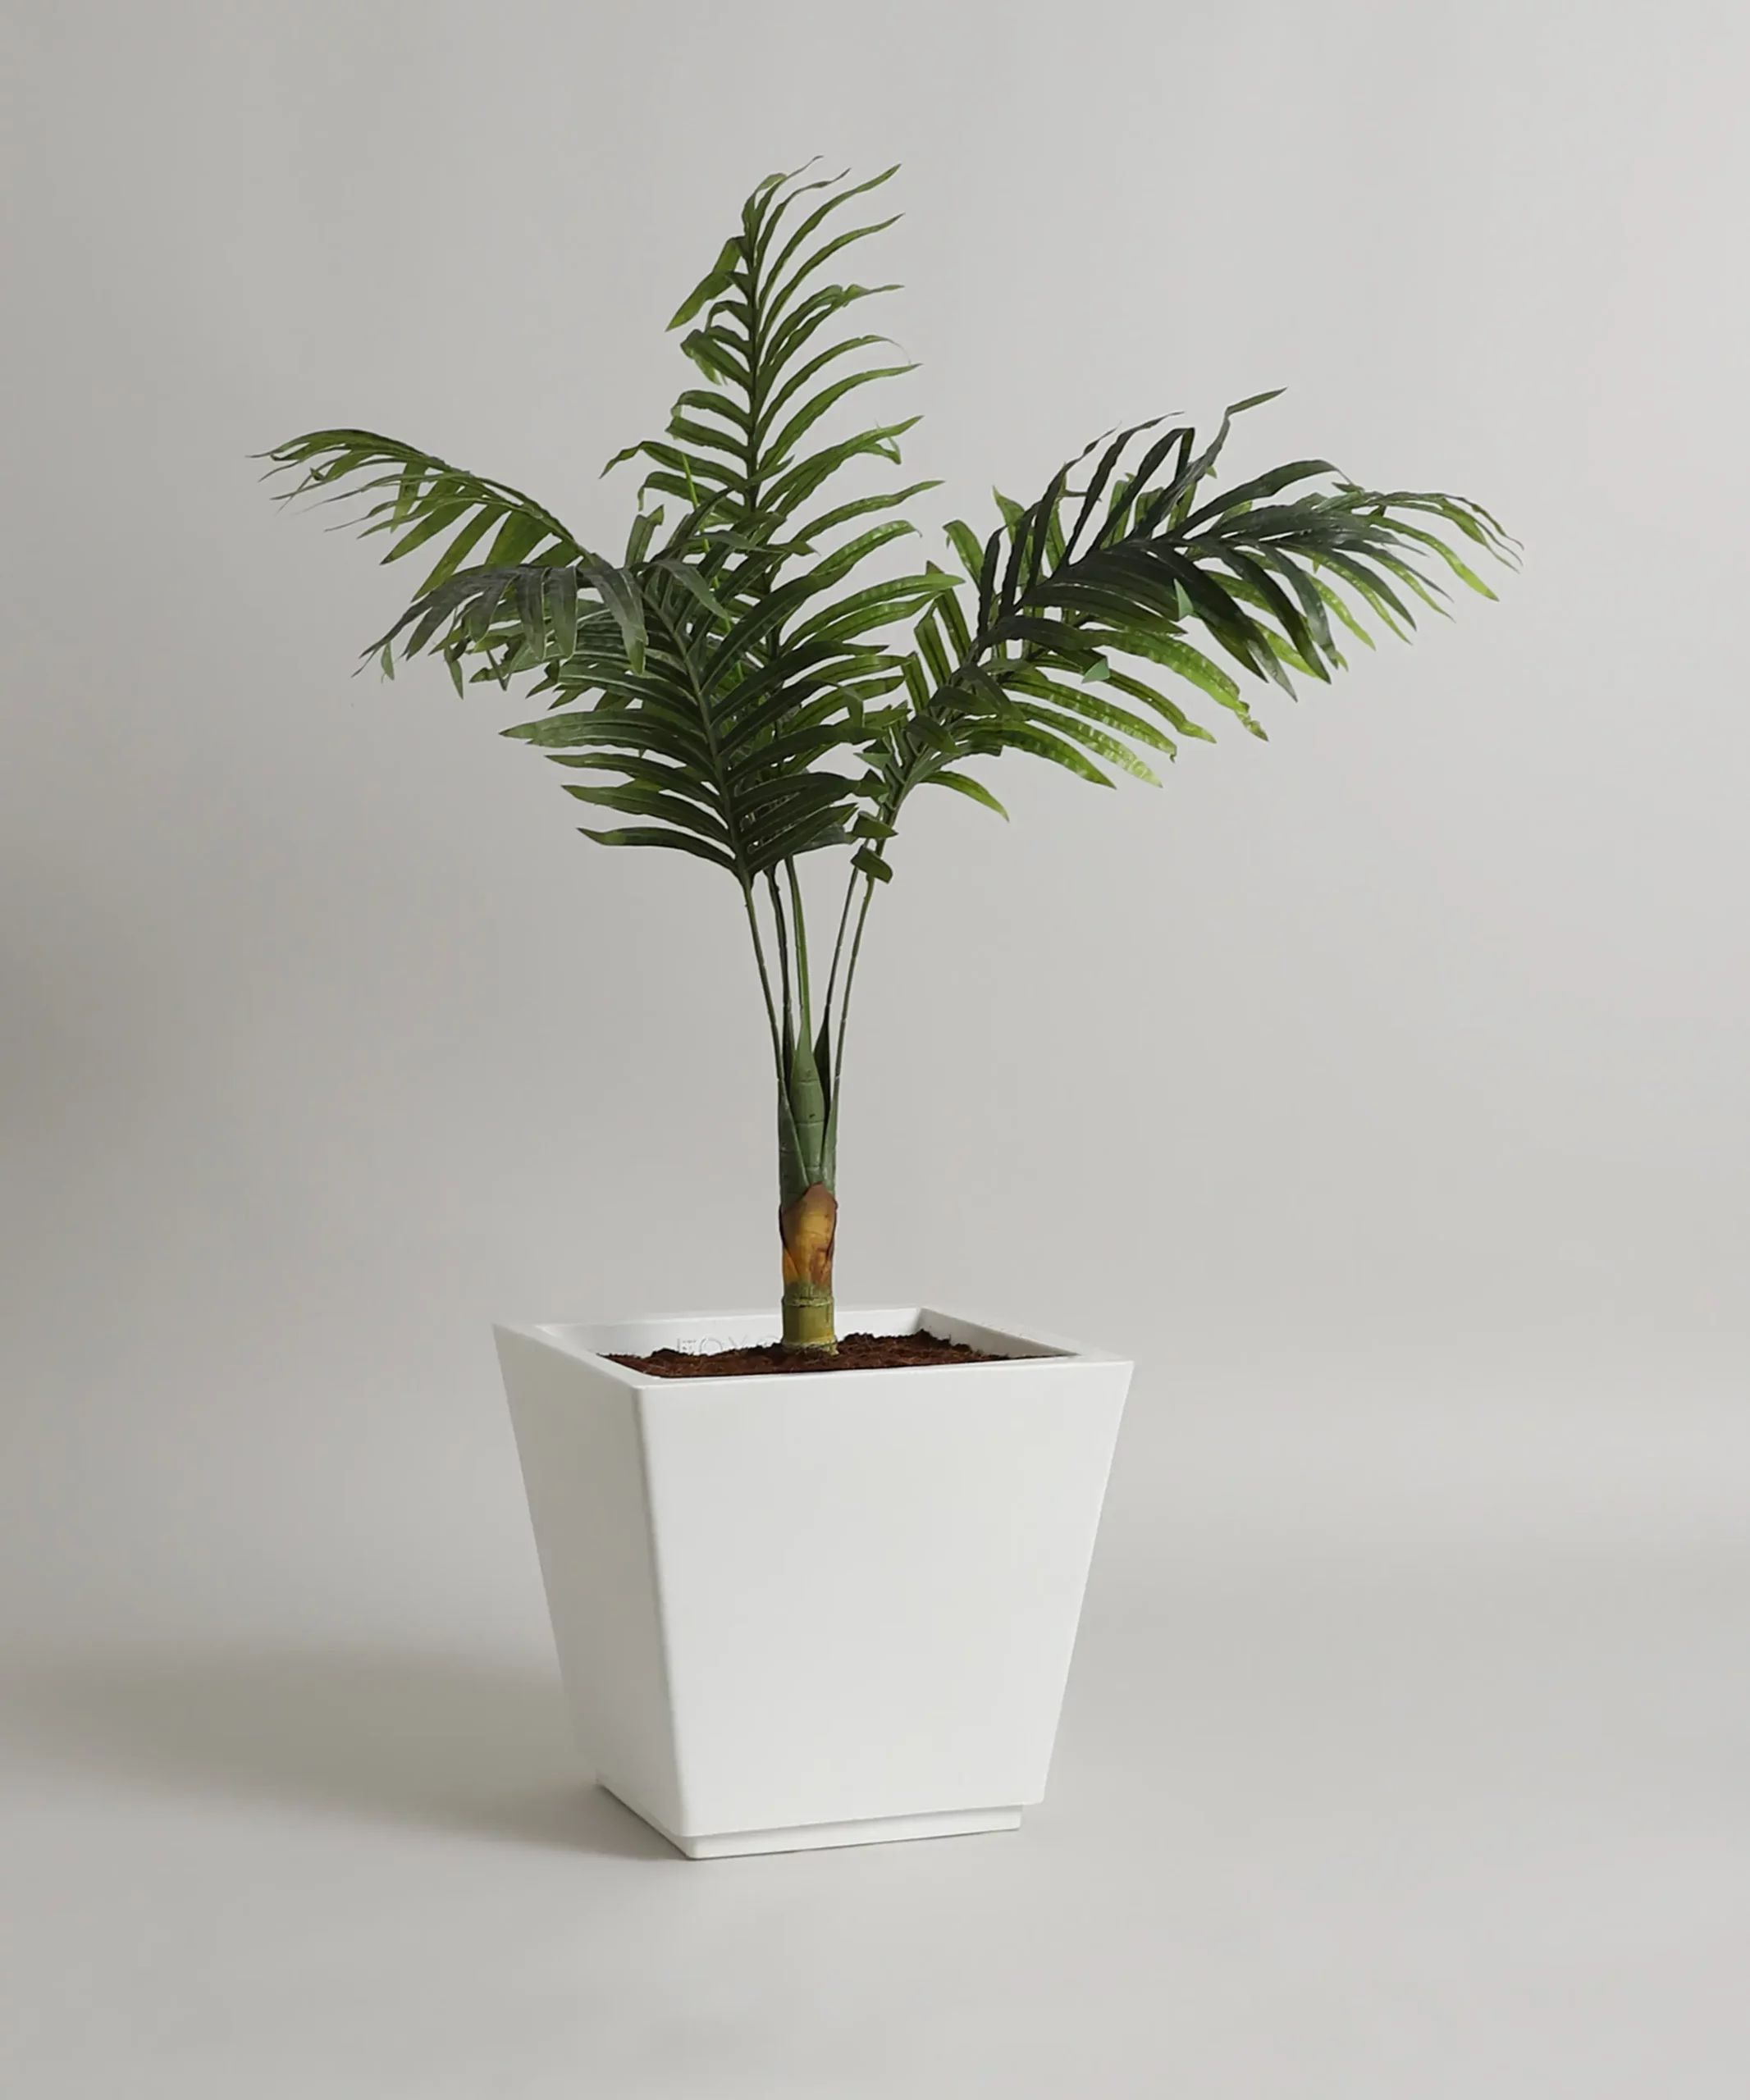 Plant Pots India, Indoor Planters, Outdoor Planters, Planters for Balcony, Planter for Office